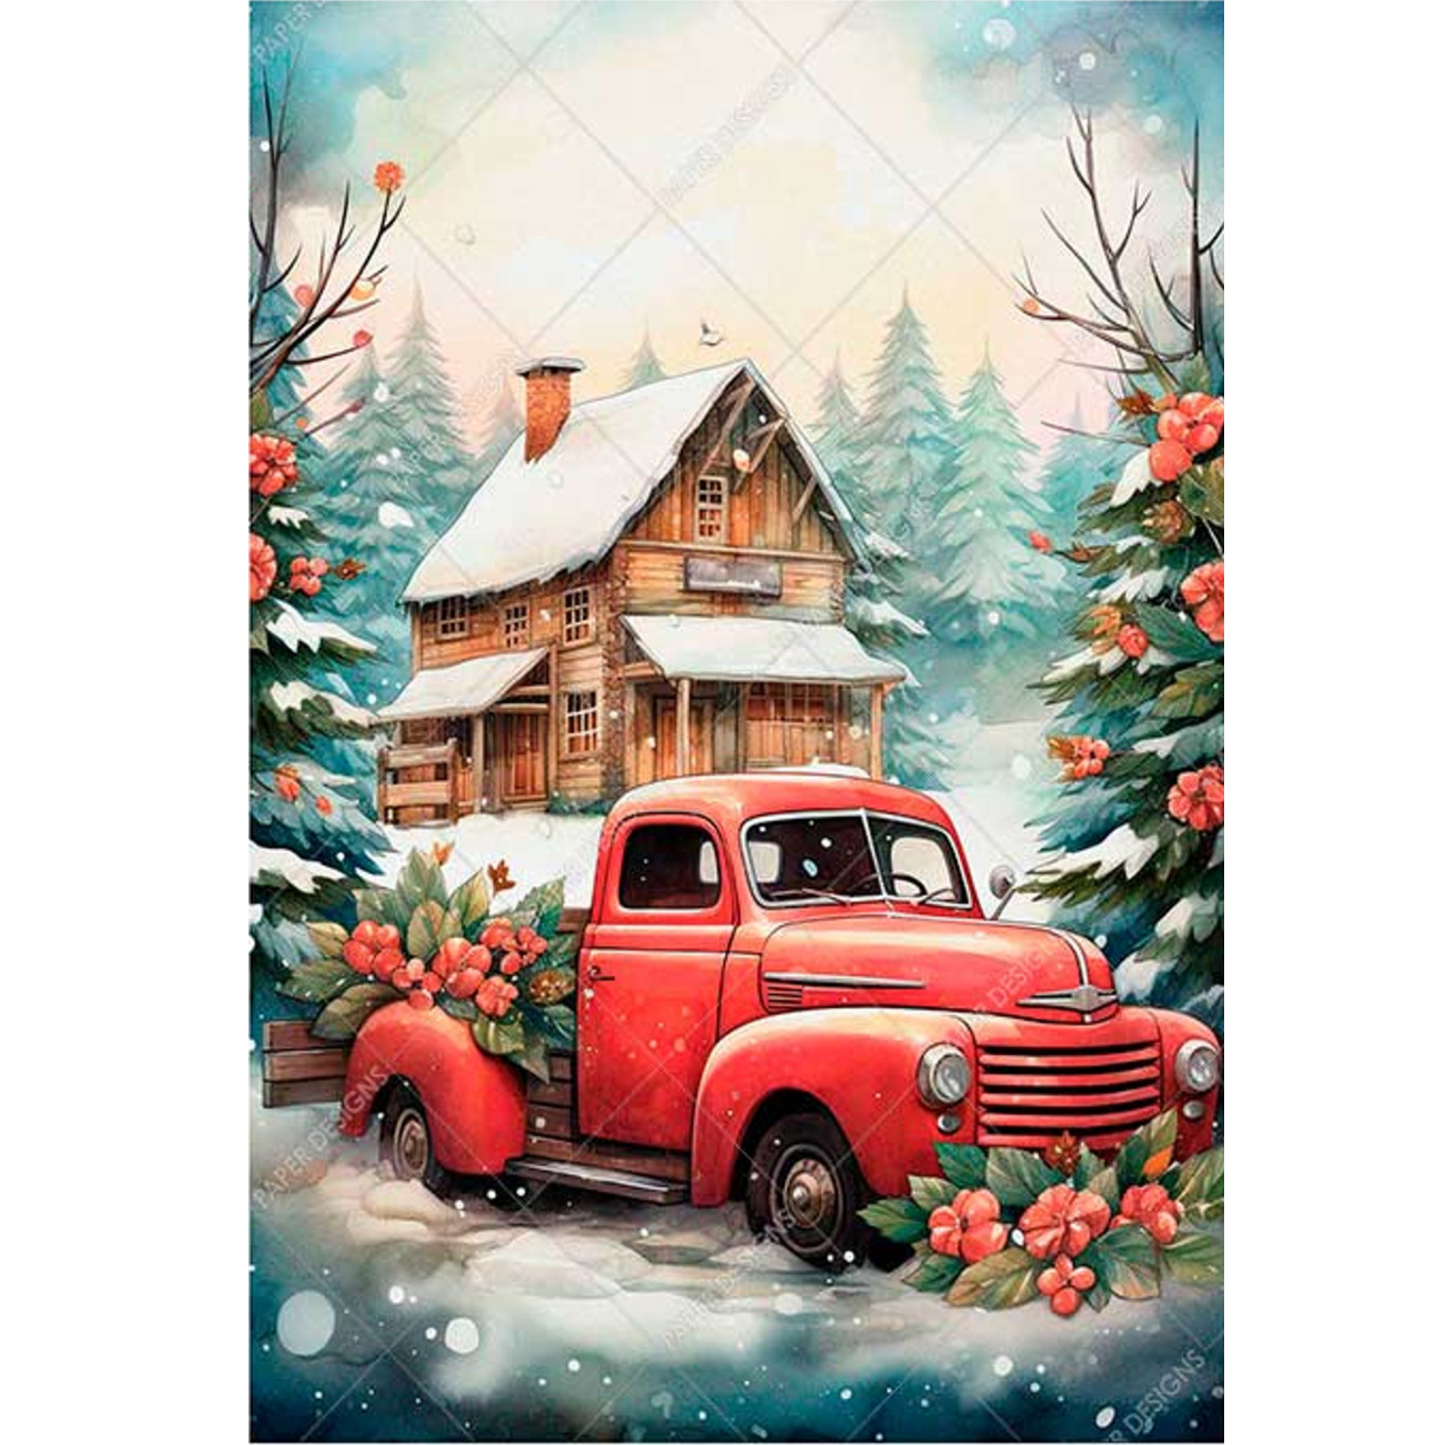 "Red Christmas Truck" decoupage rice paper by Paper Designs. Available at Milton's Daughter.